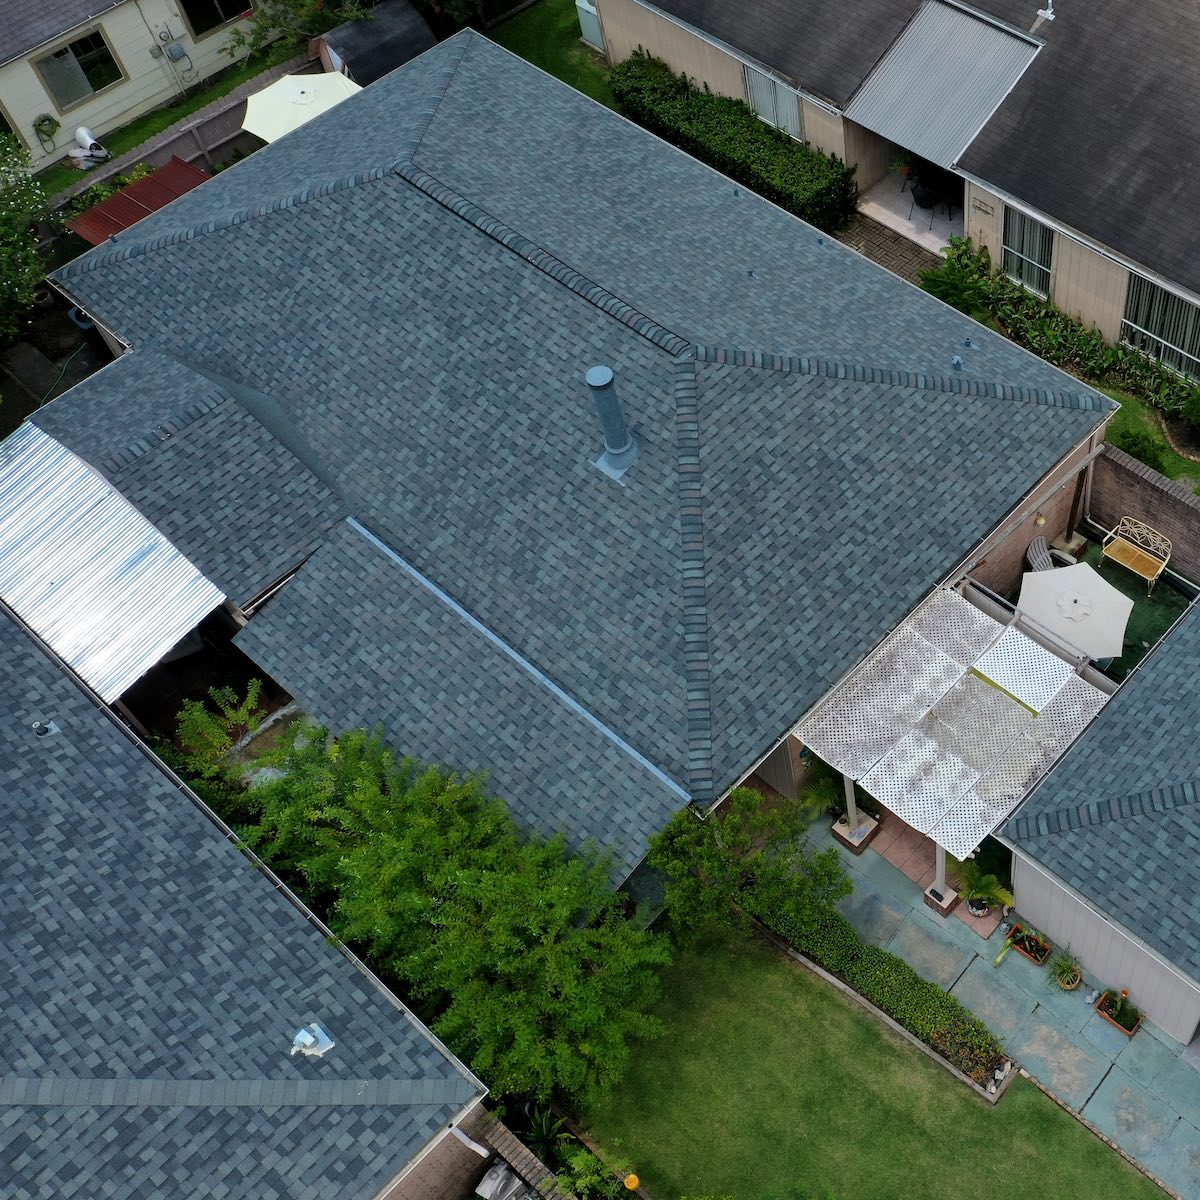 A newly repaired roof